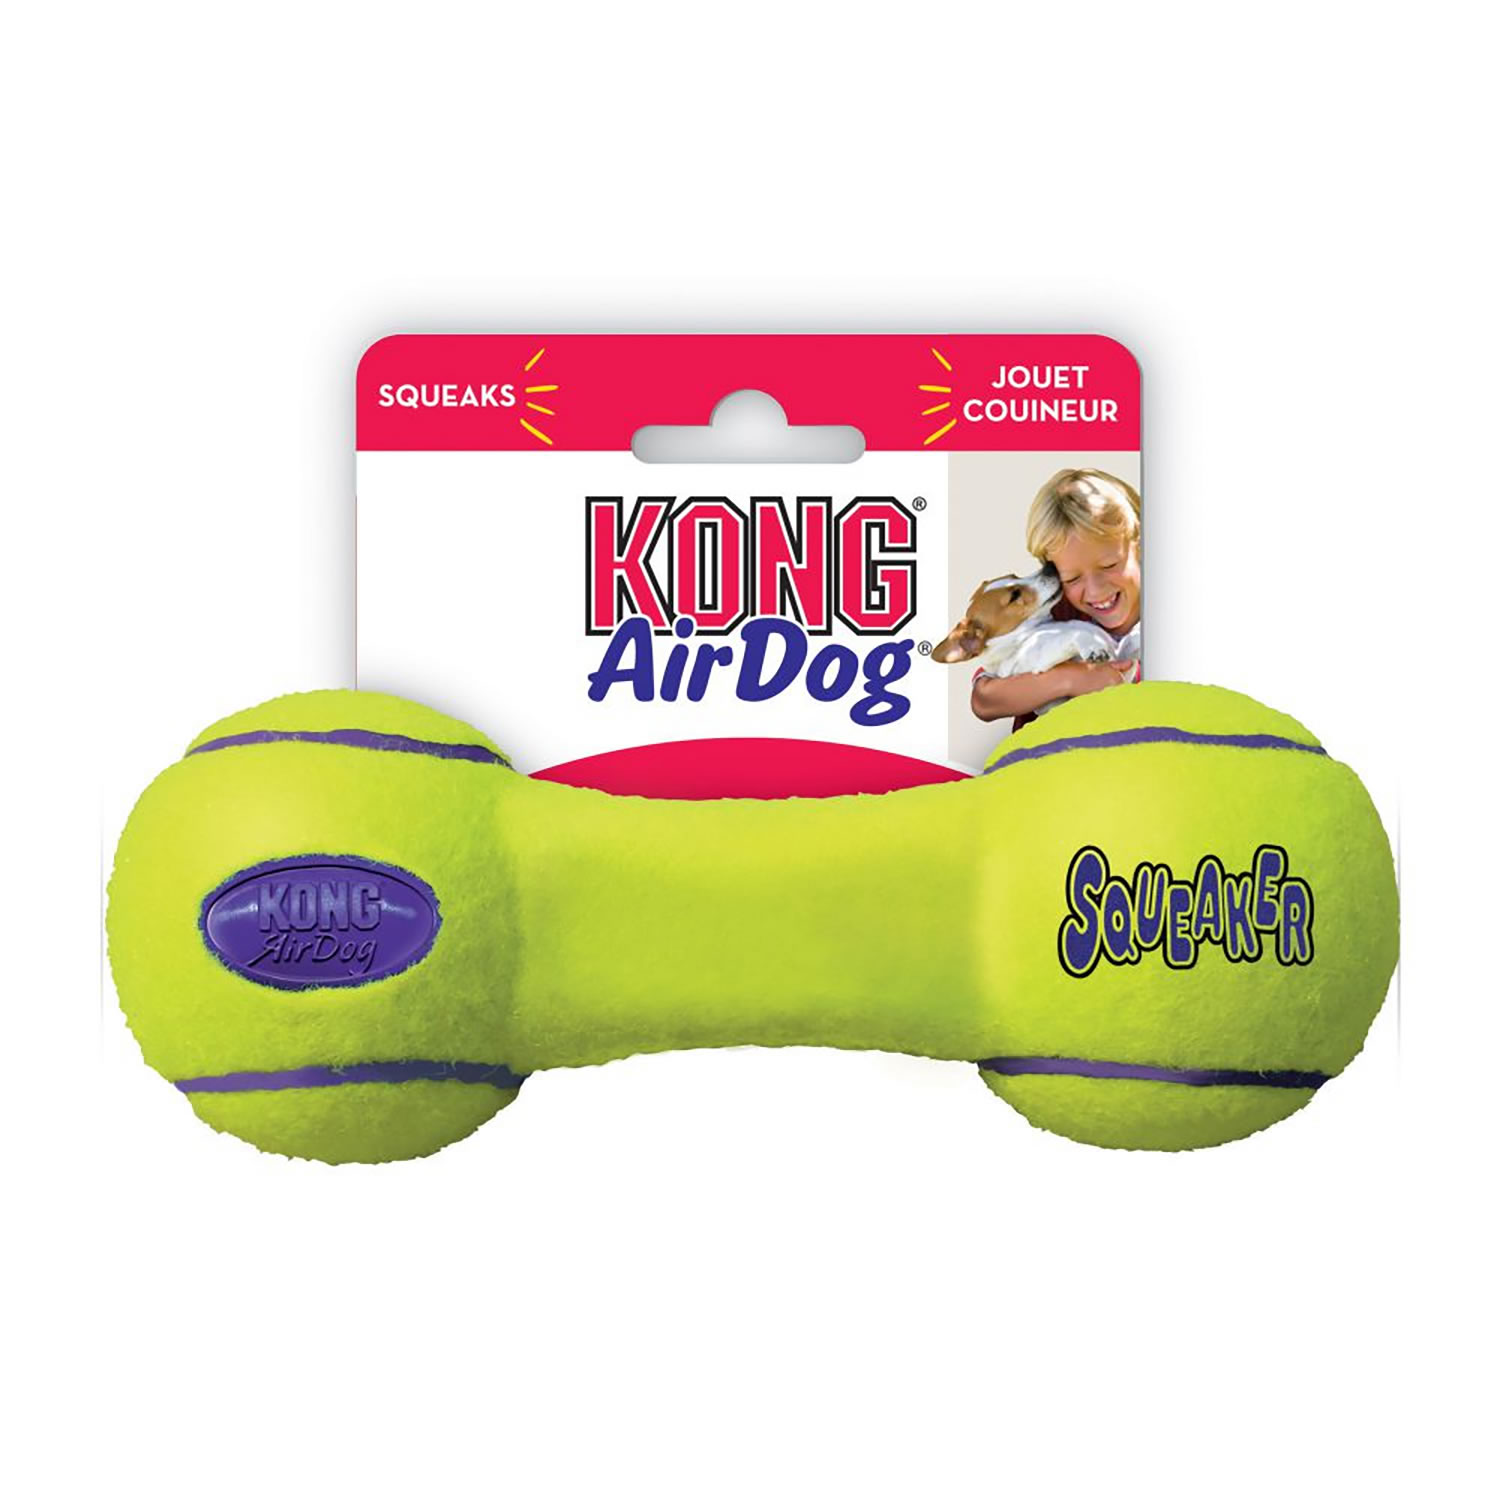 KONG AIRDOG SQUEAKER DUMBBELL LARGE YELLOW/BLUE